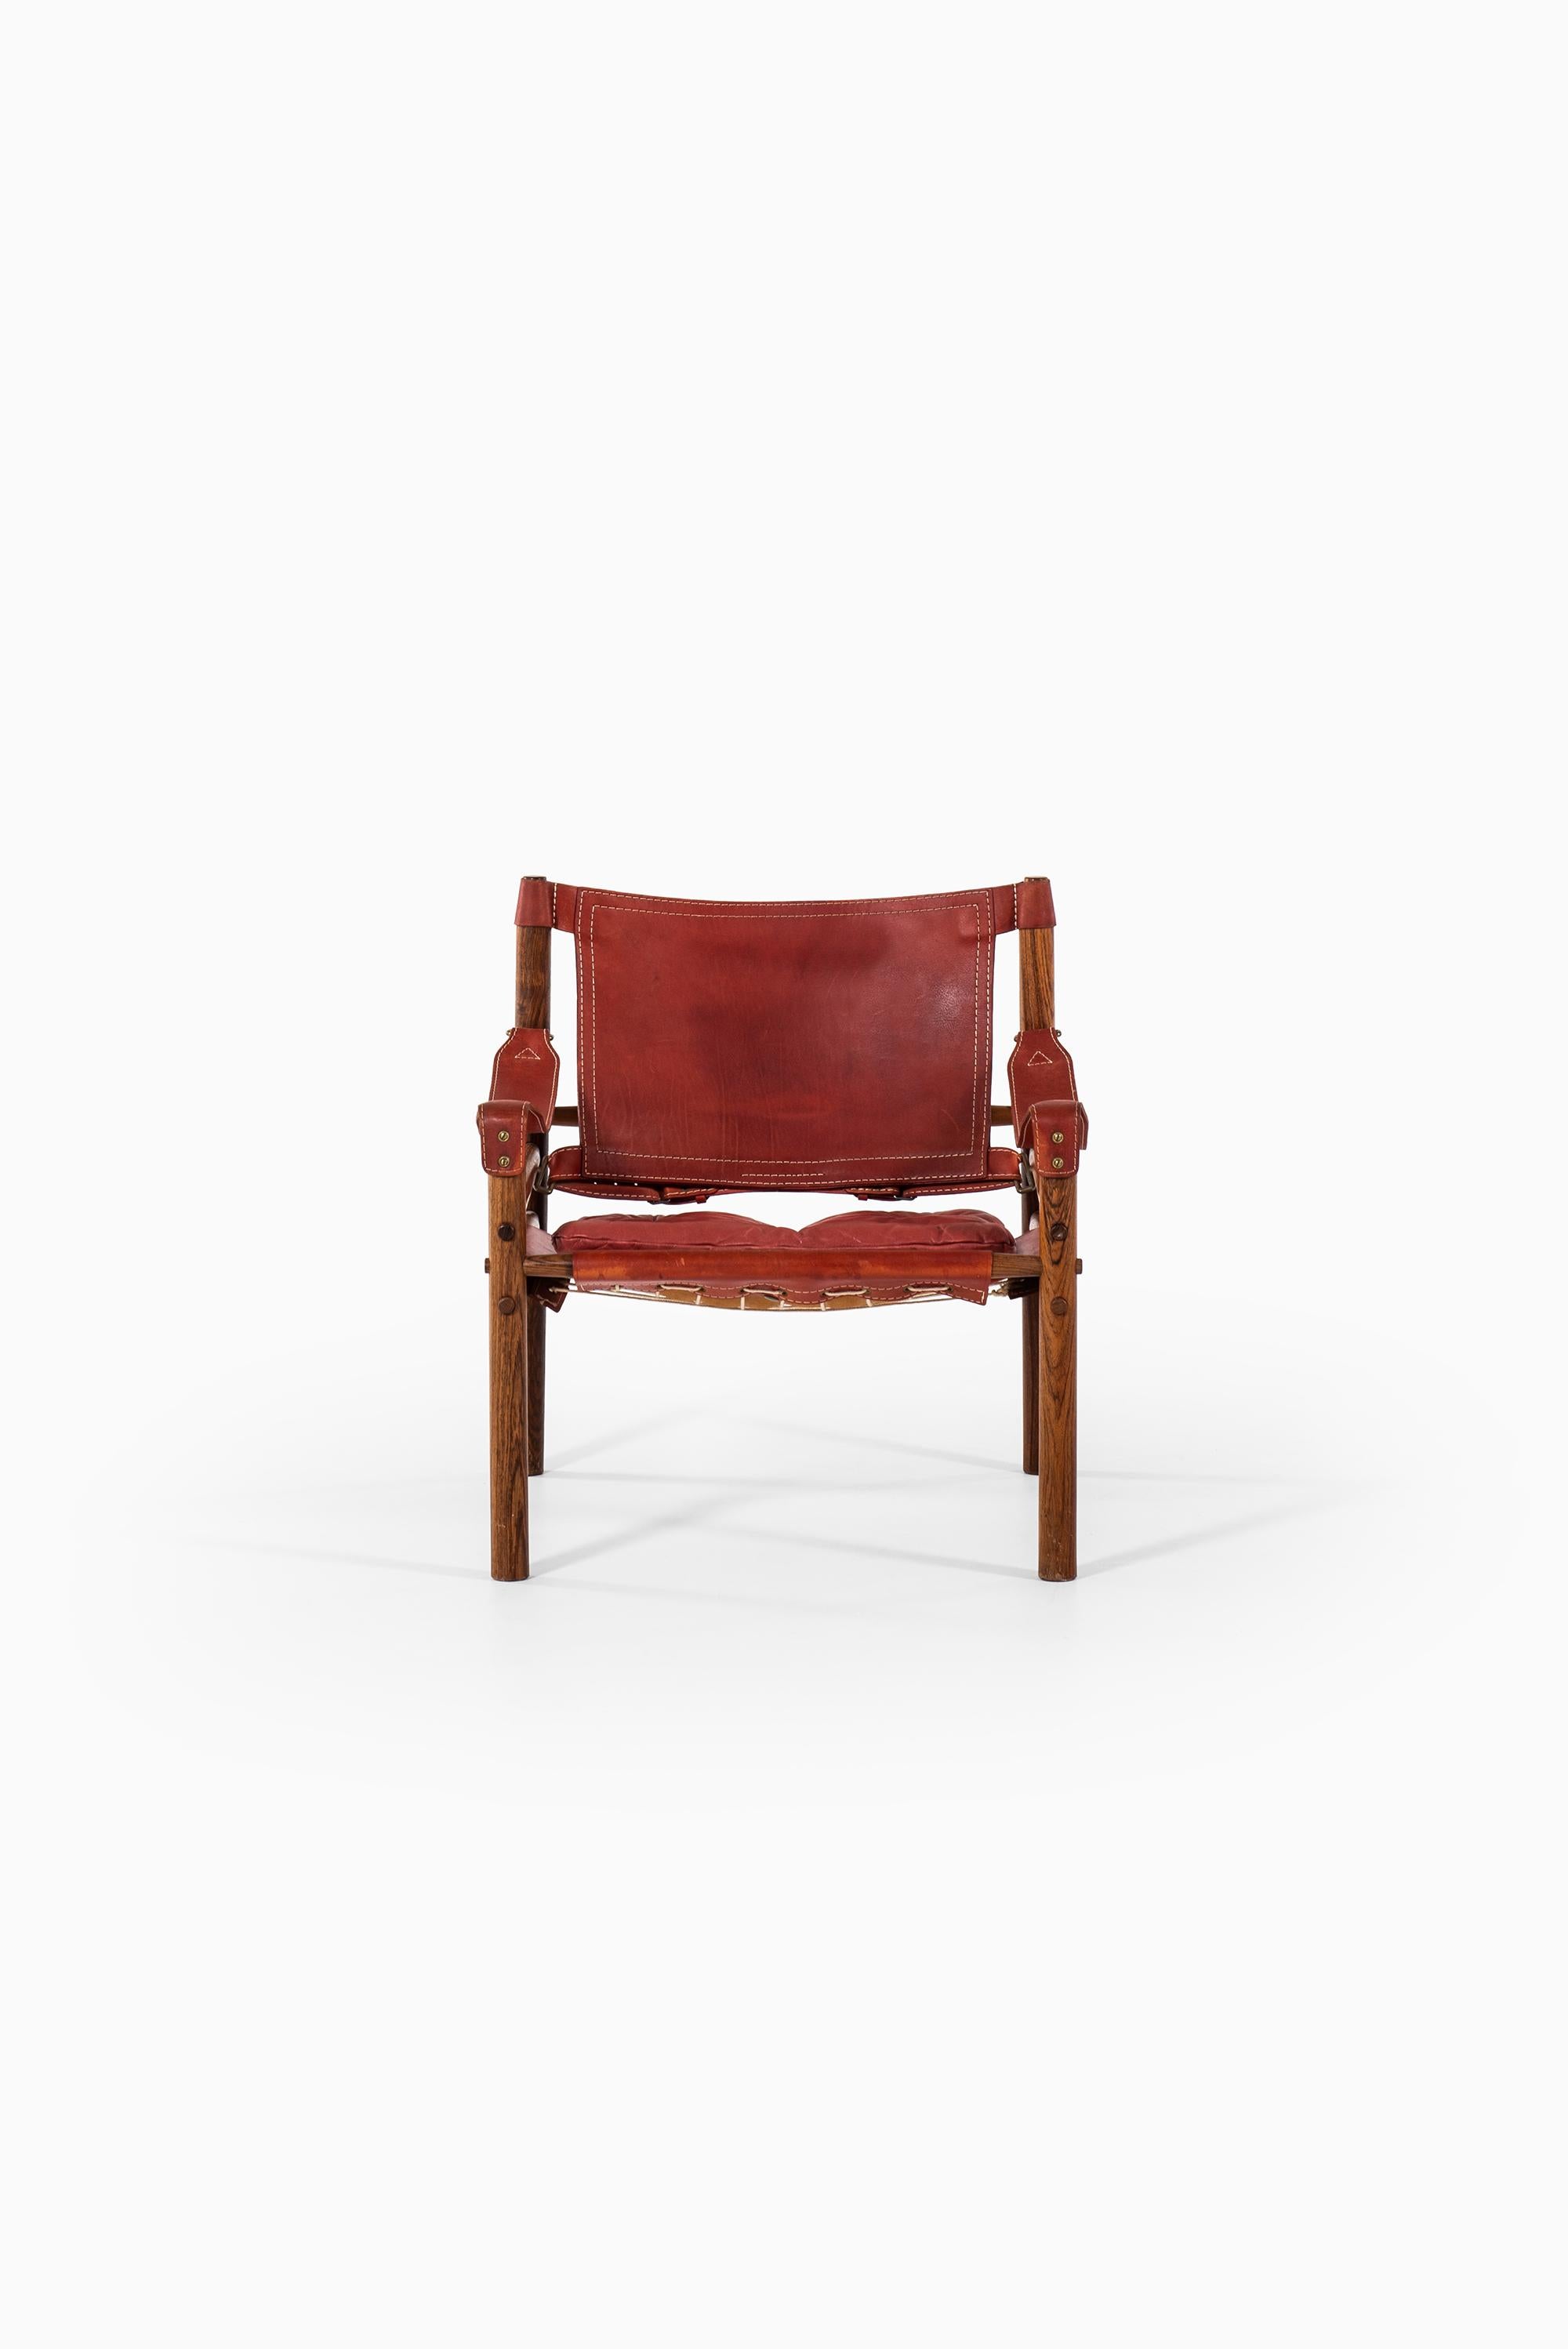 Easy chair model Sirocco designed by Arne Norell. Produced by Arne Norell AB in Aneby, Sweden.